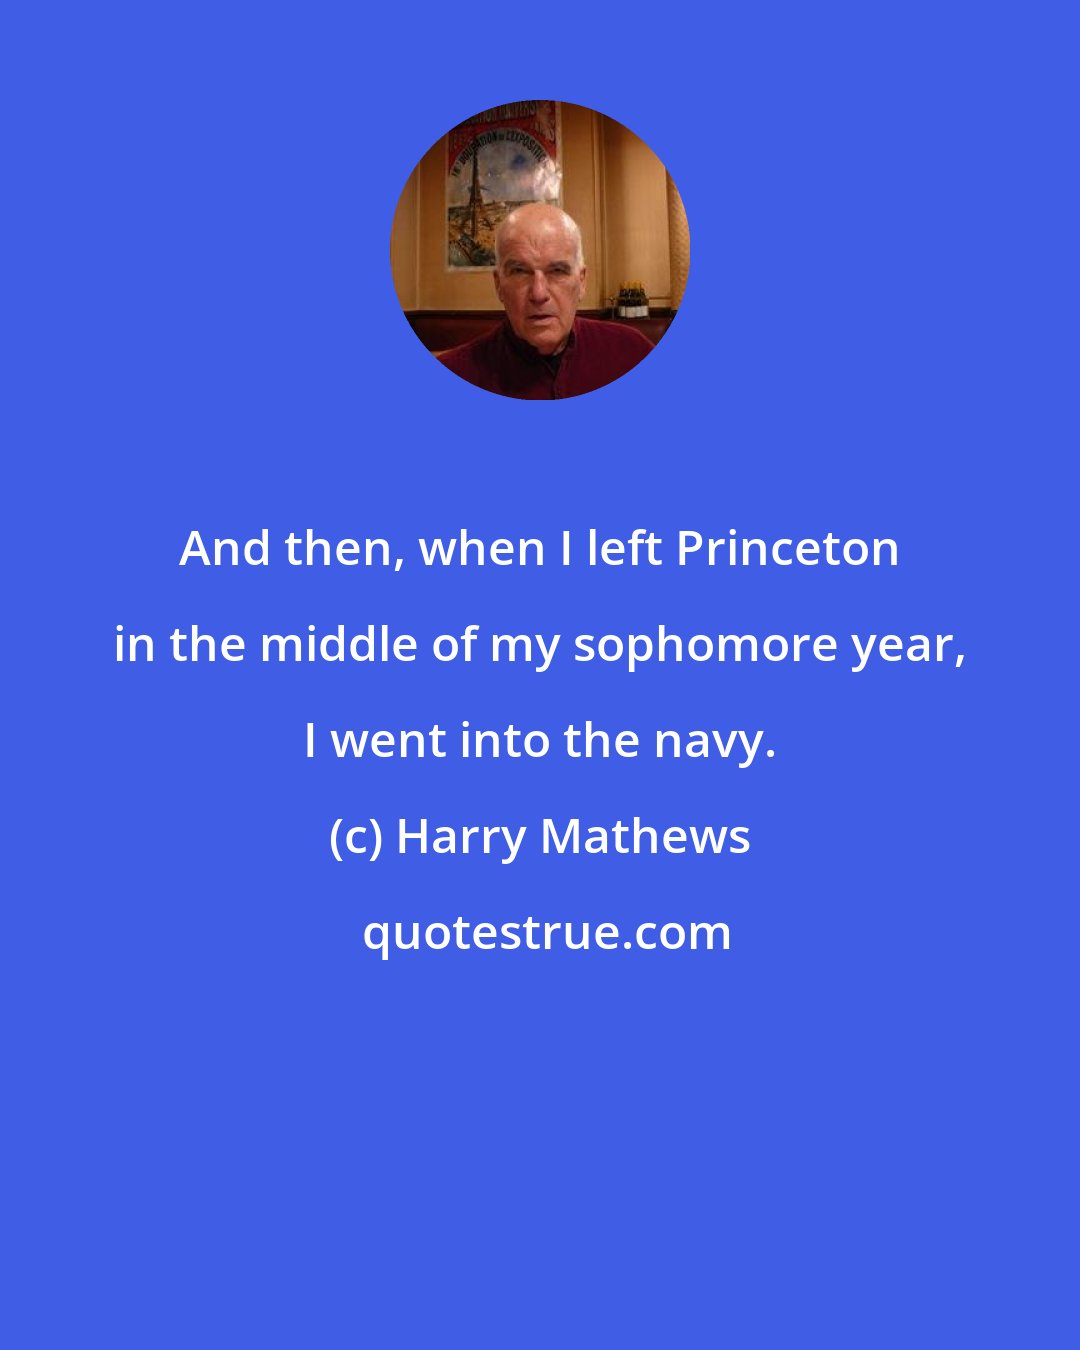 Harry Mathews: And then, when I left Princeton in the middle of my sophomore year, I went into the navy.